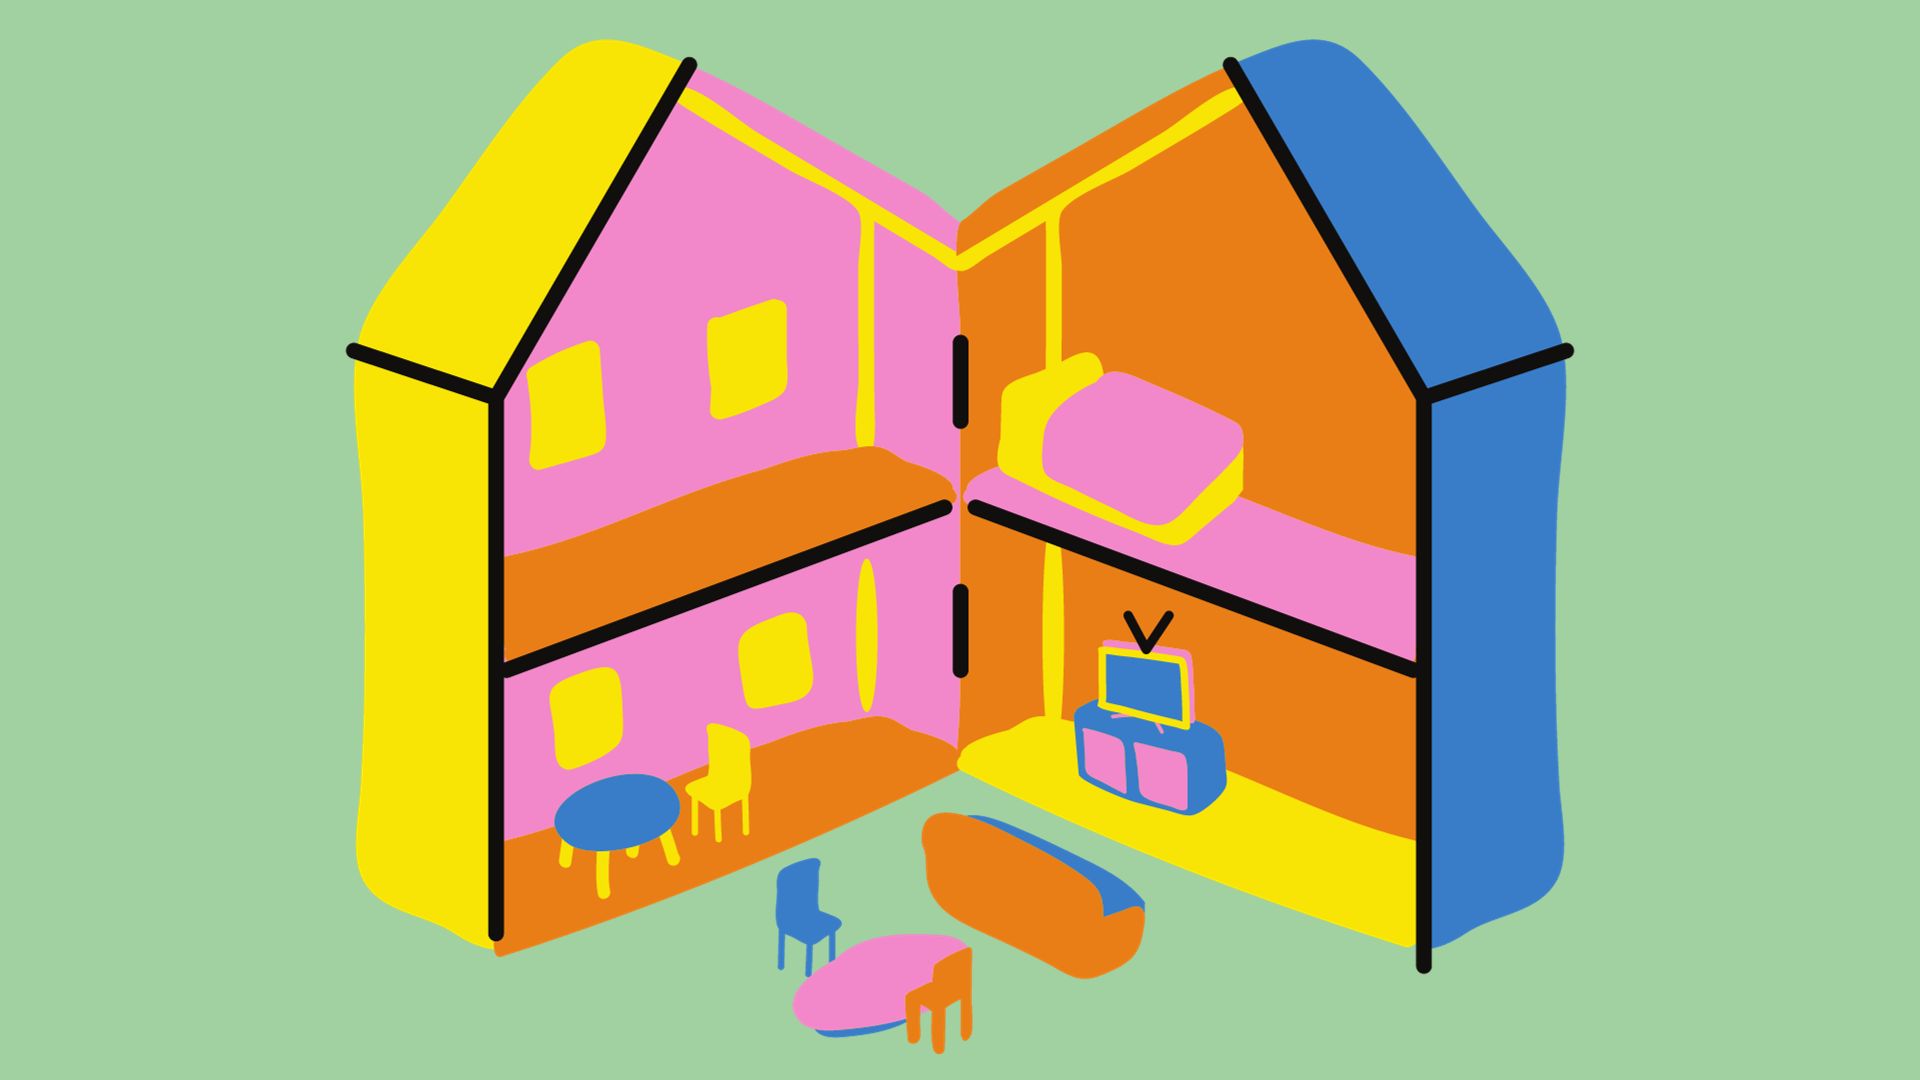 an image of a cartoon doll house that is opened up with a picknick bench and couch in the foreground where the house is opened up